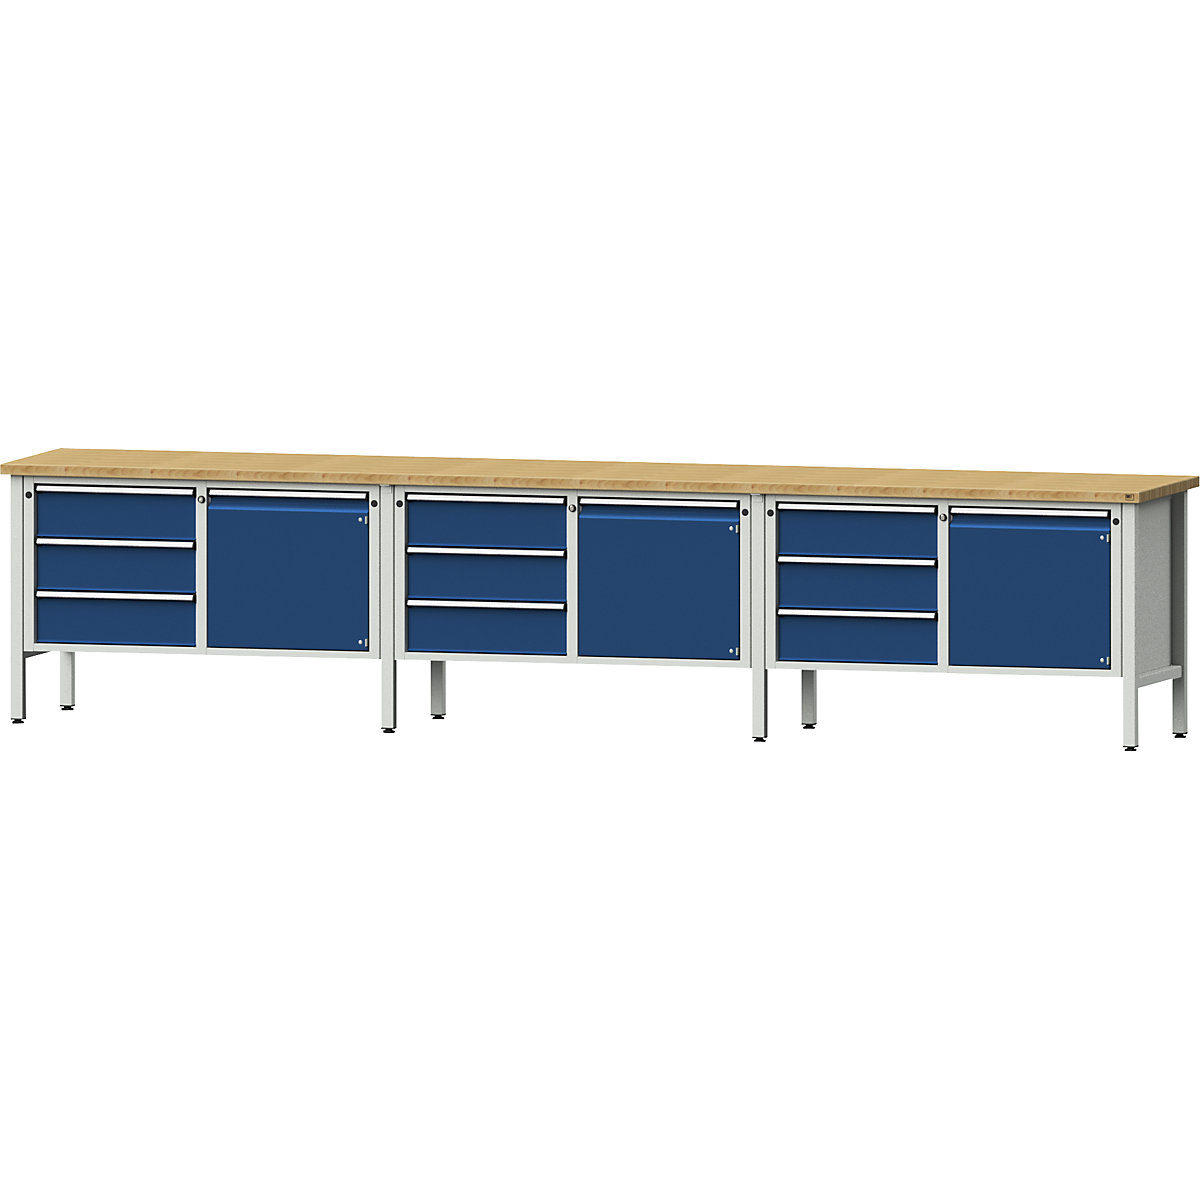 Workbench extra wide, frame construction - ANKE